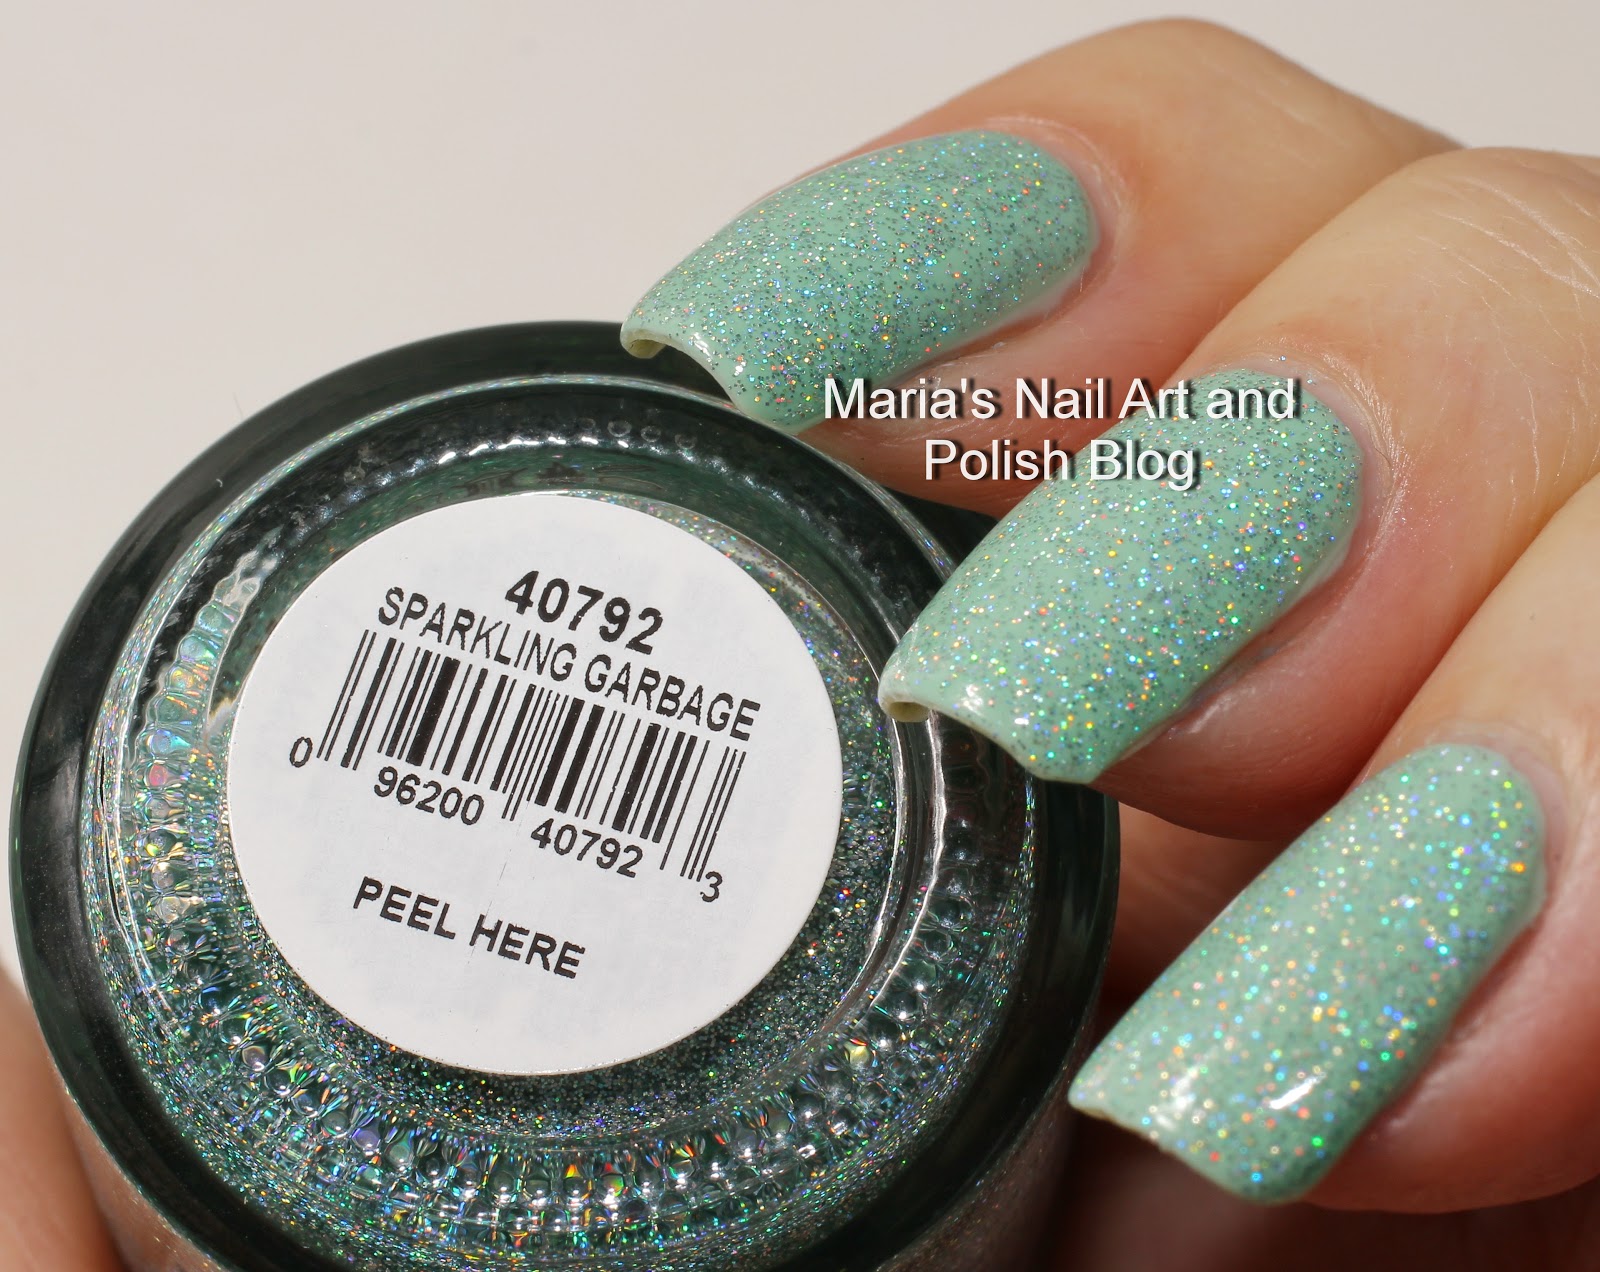 Orly Color Blast Nail Polish in "Sparkling Garbage" - wide 6